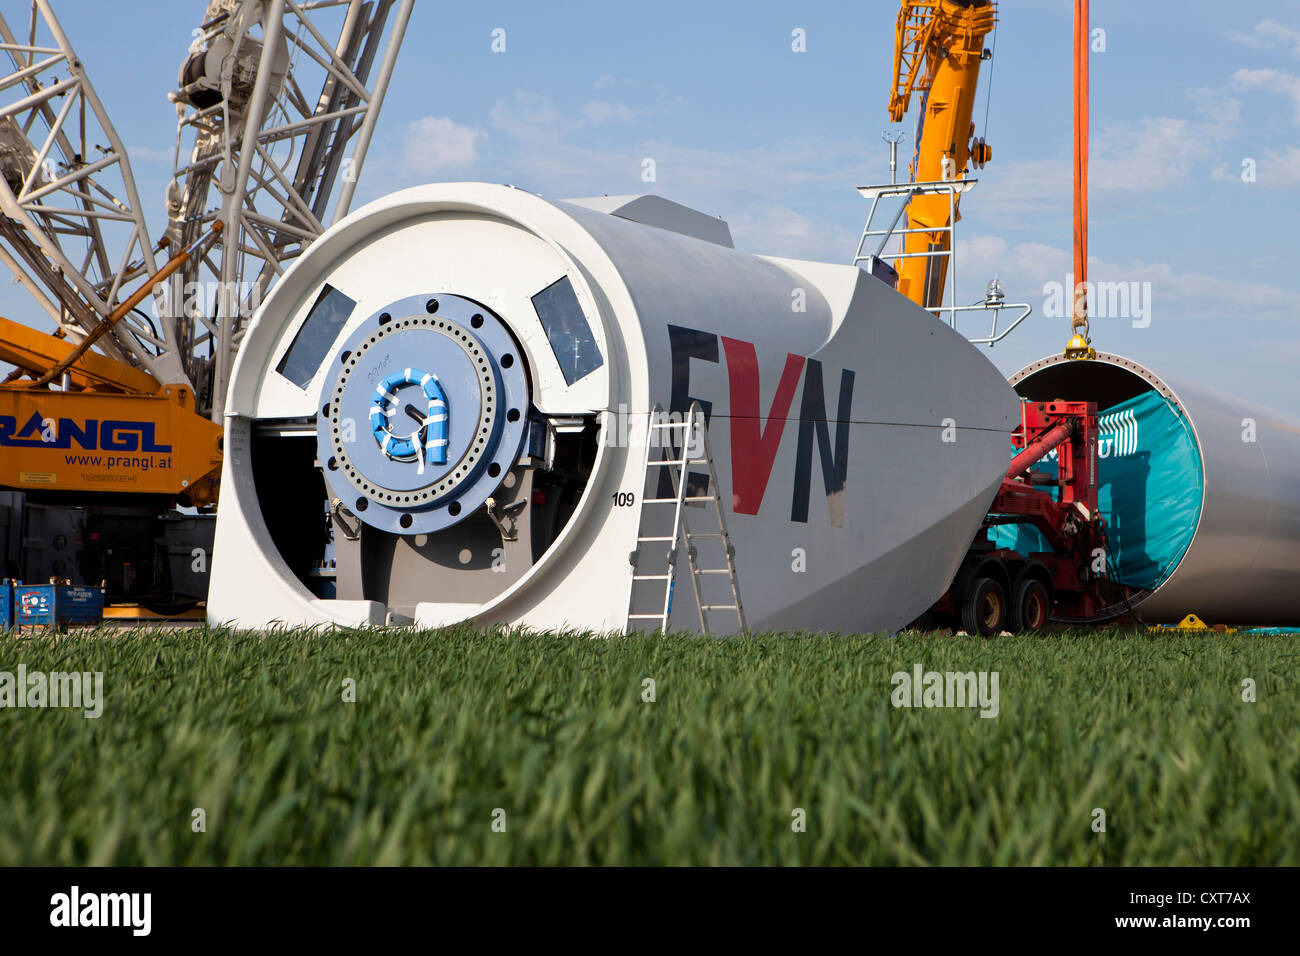 Generator to be fitted with wind turbine by EVN and Wien Energie, Windpark Glinzendorf, Marchfeld, Lower Austria, Austria Stock Photo